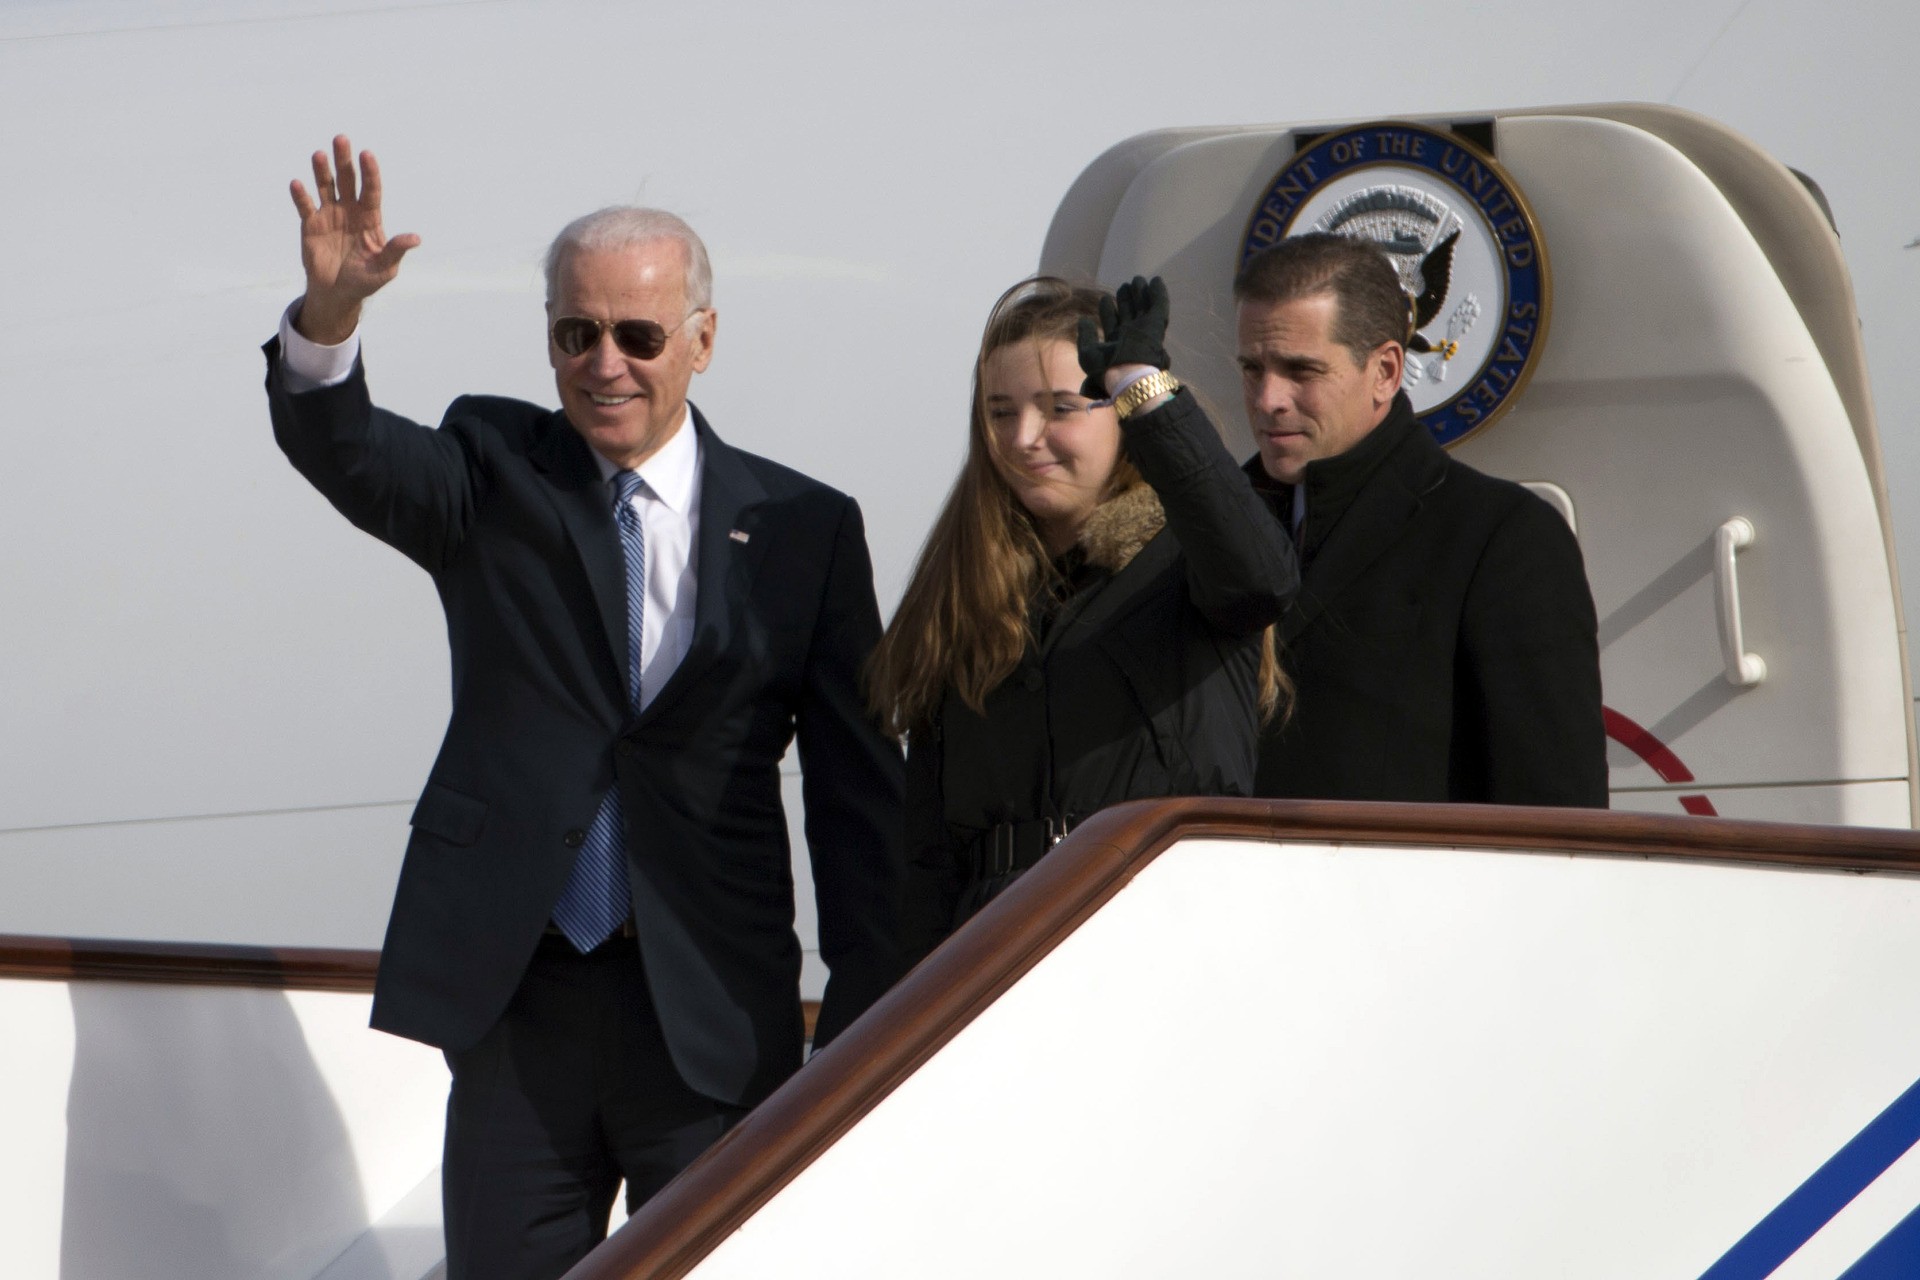 Biden regime’s “free at-home COVID test kits” are coming from China, proving again first family’s ties to Beijing run deep